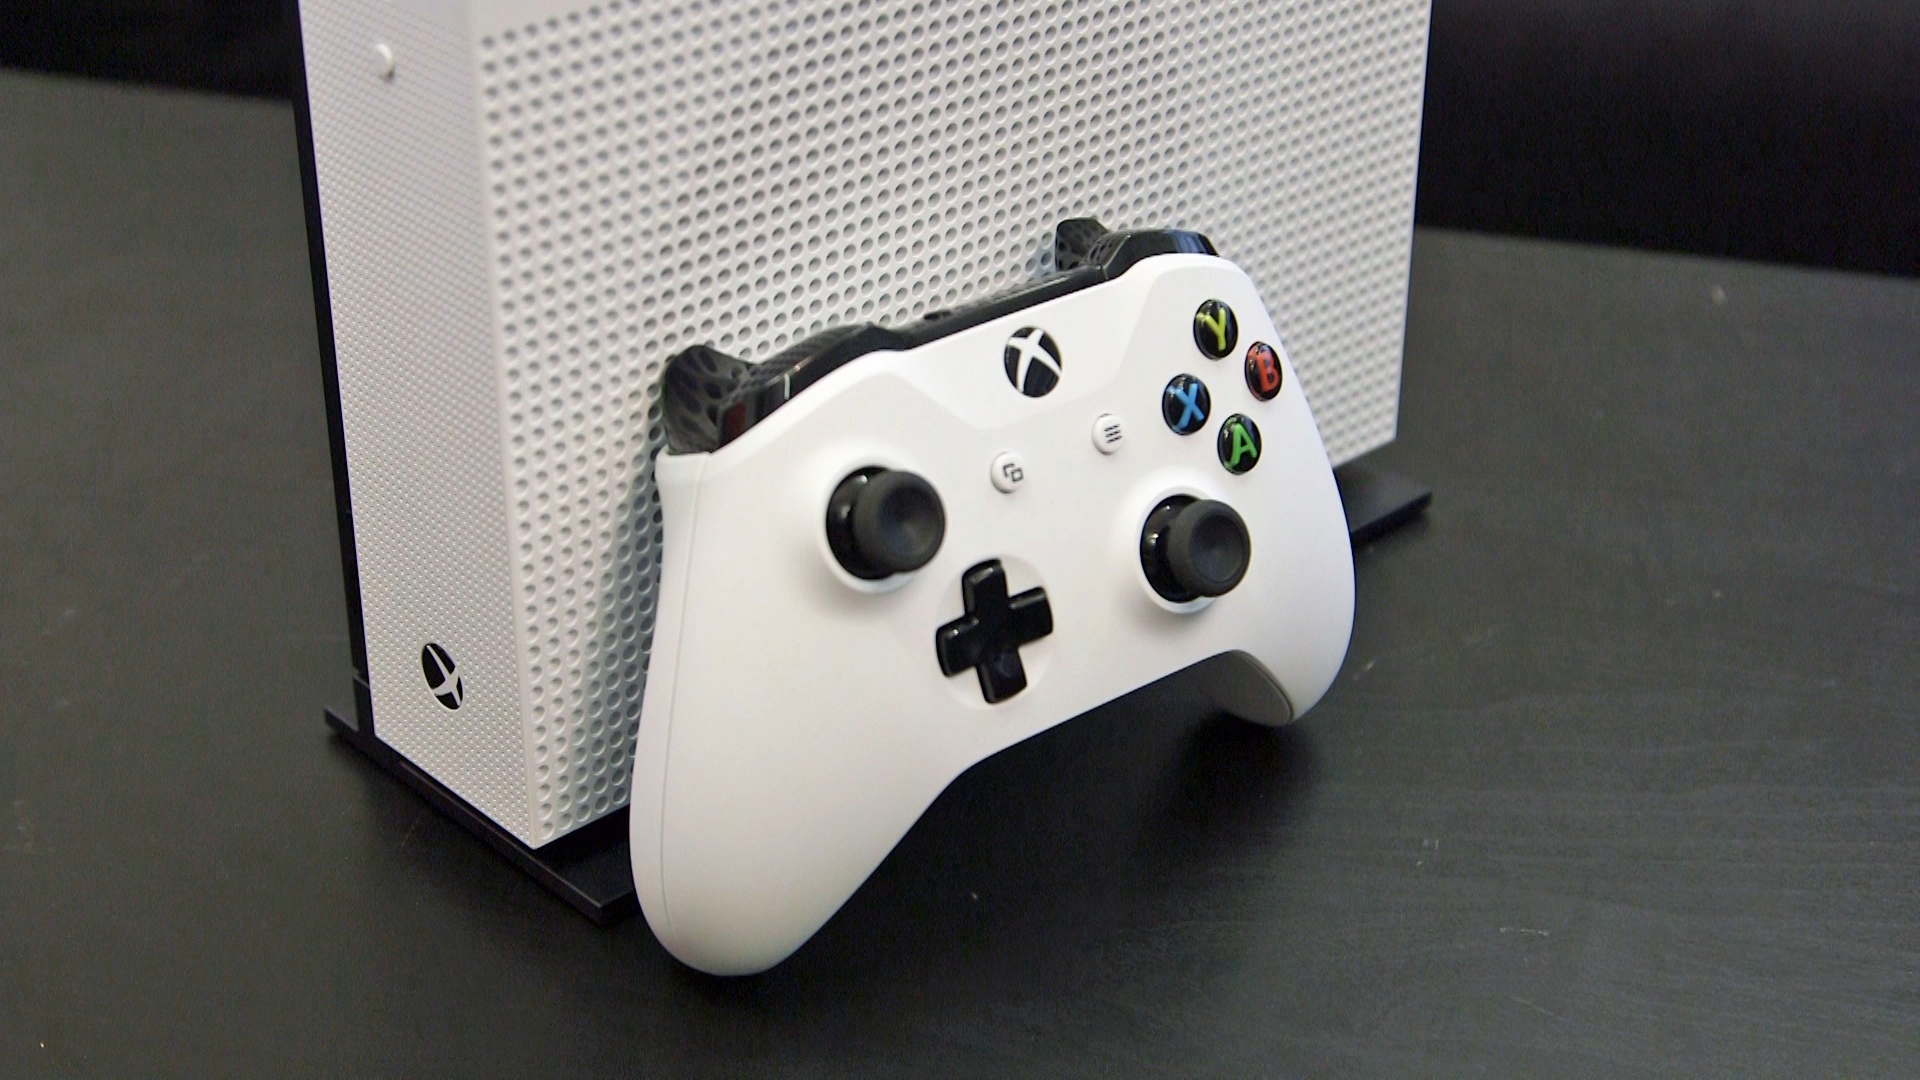 New Xbox One S - Xbox One S Controller - HD Wallpaper 